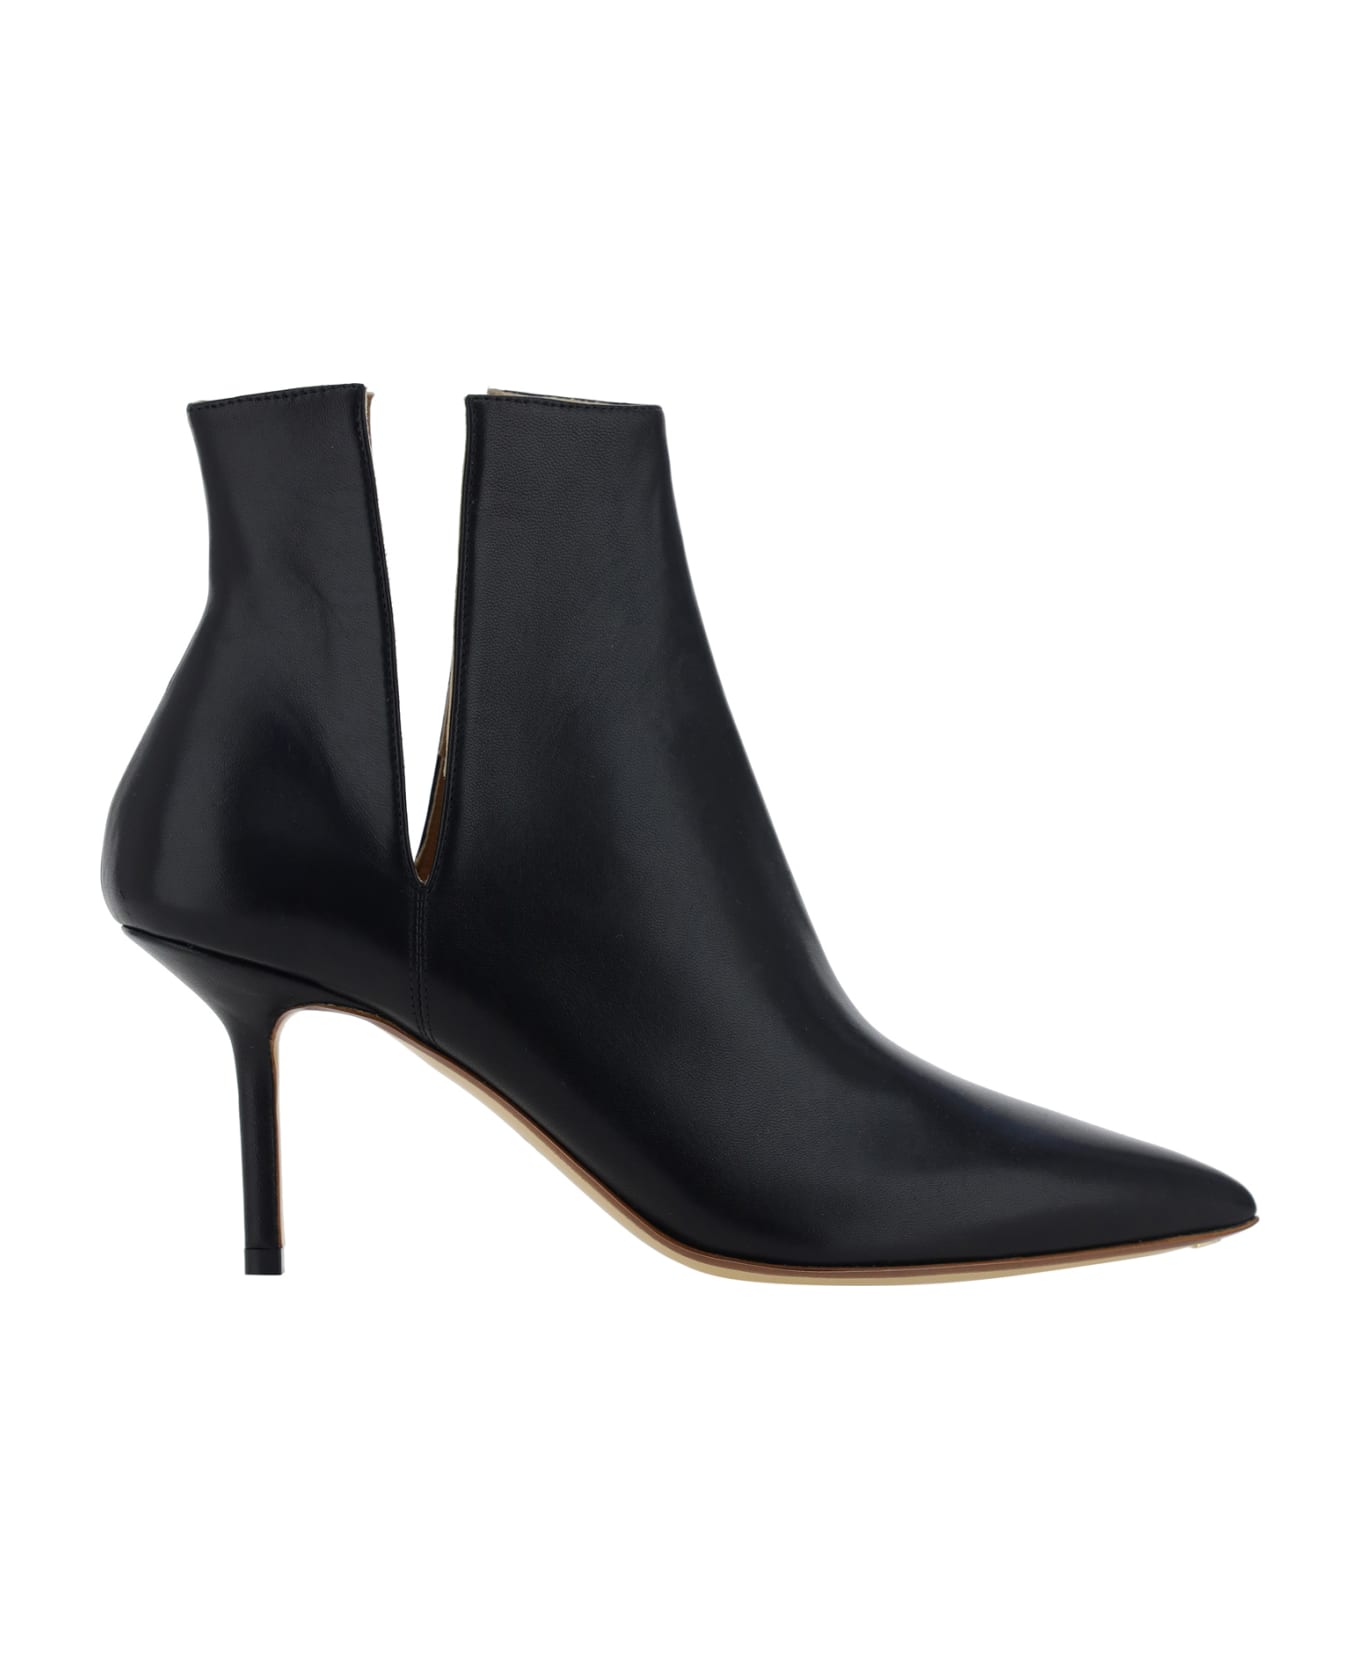 Francesco Russo Heeled Ankle Boots - Black ブーツ